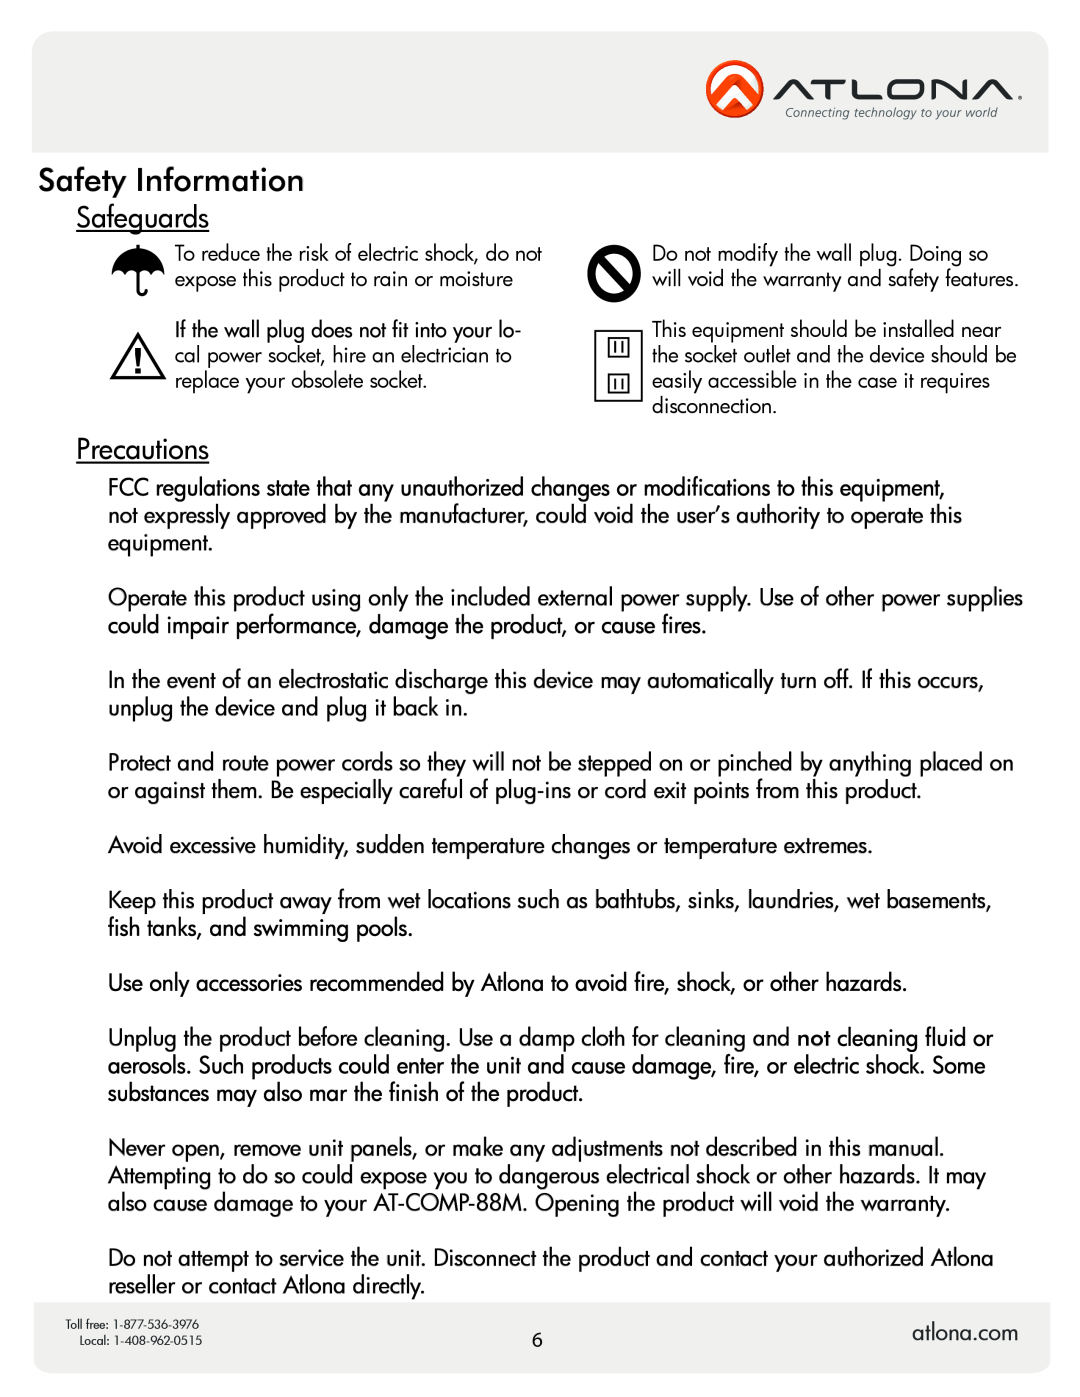 Atlona AT-COMP-88M user manual Safeguards, Precautions, Safety Information 